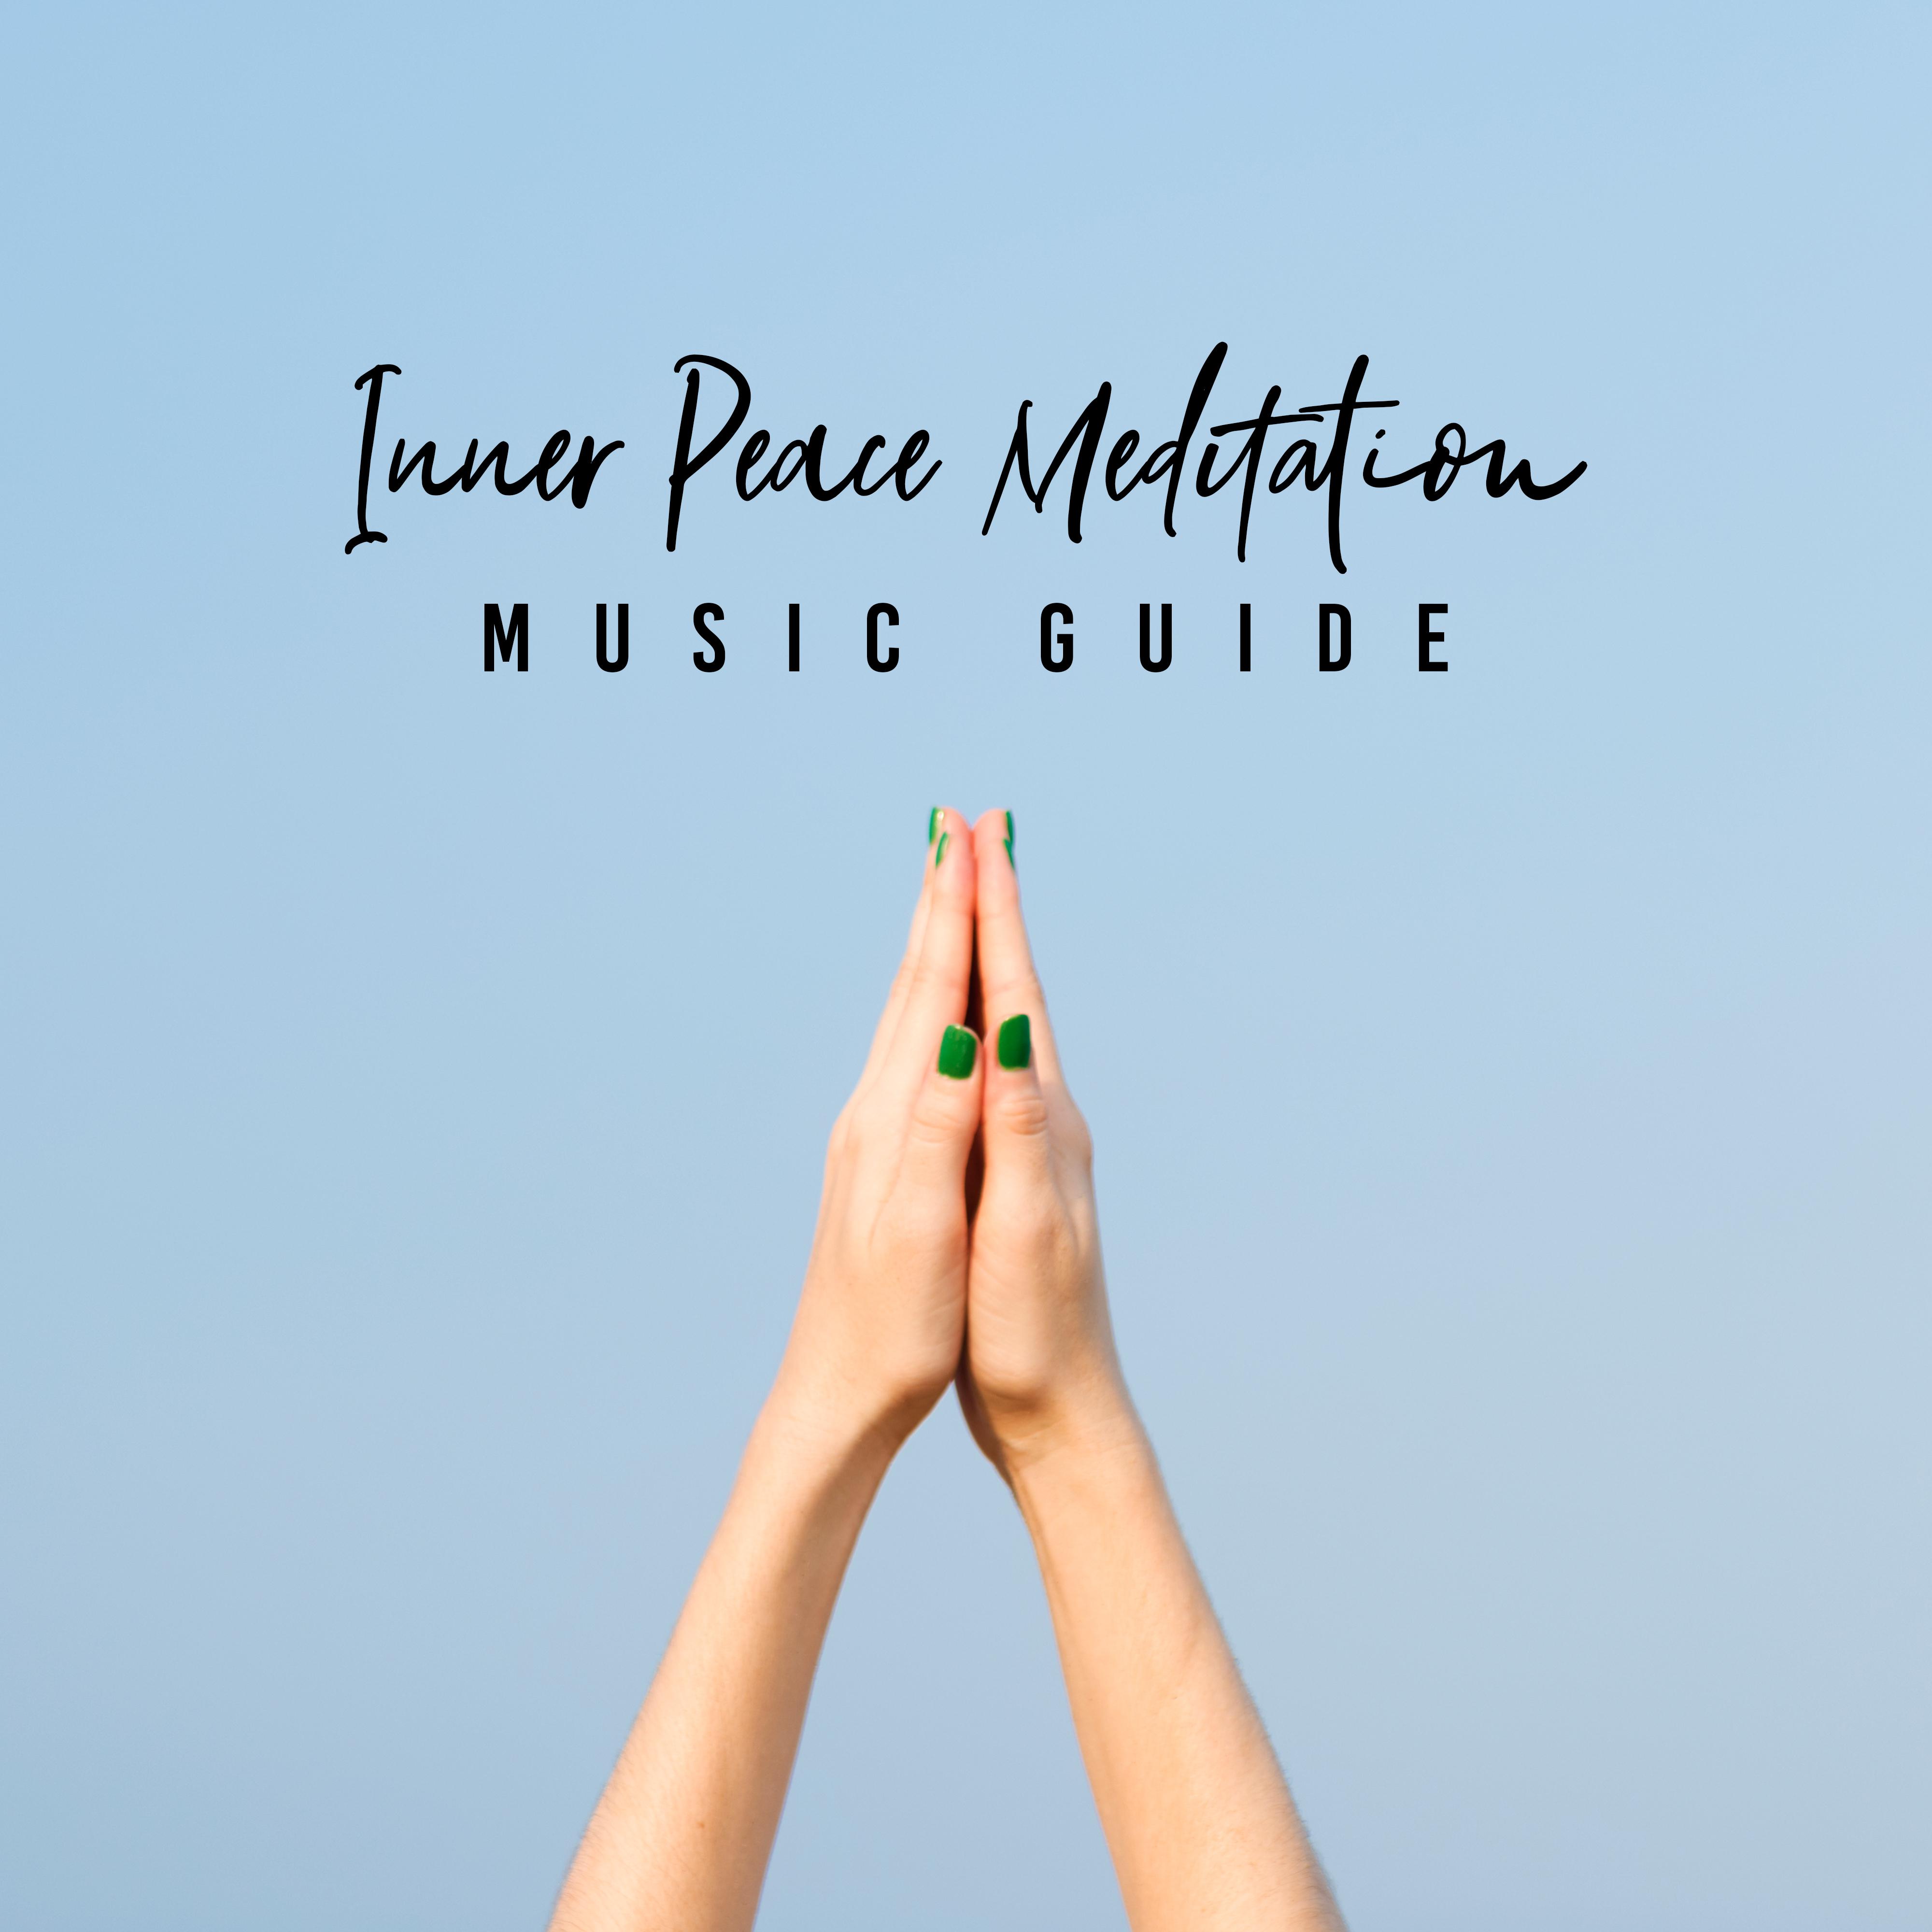 Inner Peace Meditation Music Guide: New Age 2019 Compilation, Yoga Spiritual Training, Deep Body & Soul Relaxation, Mindful Journey, Third Eye Open